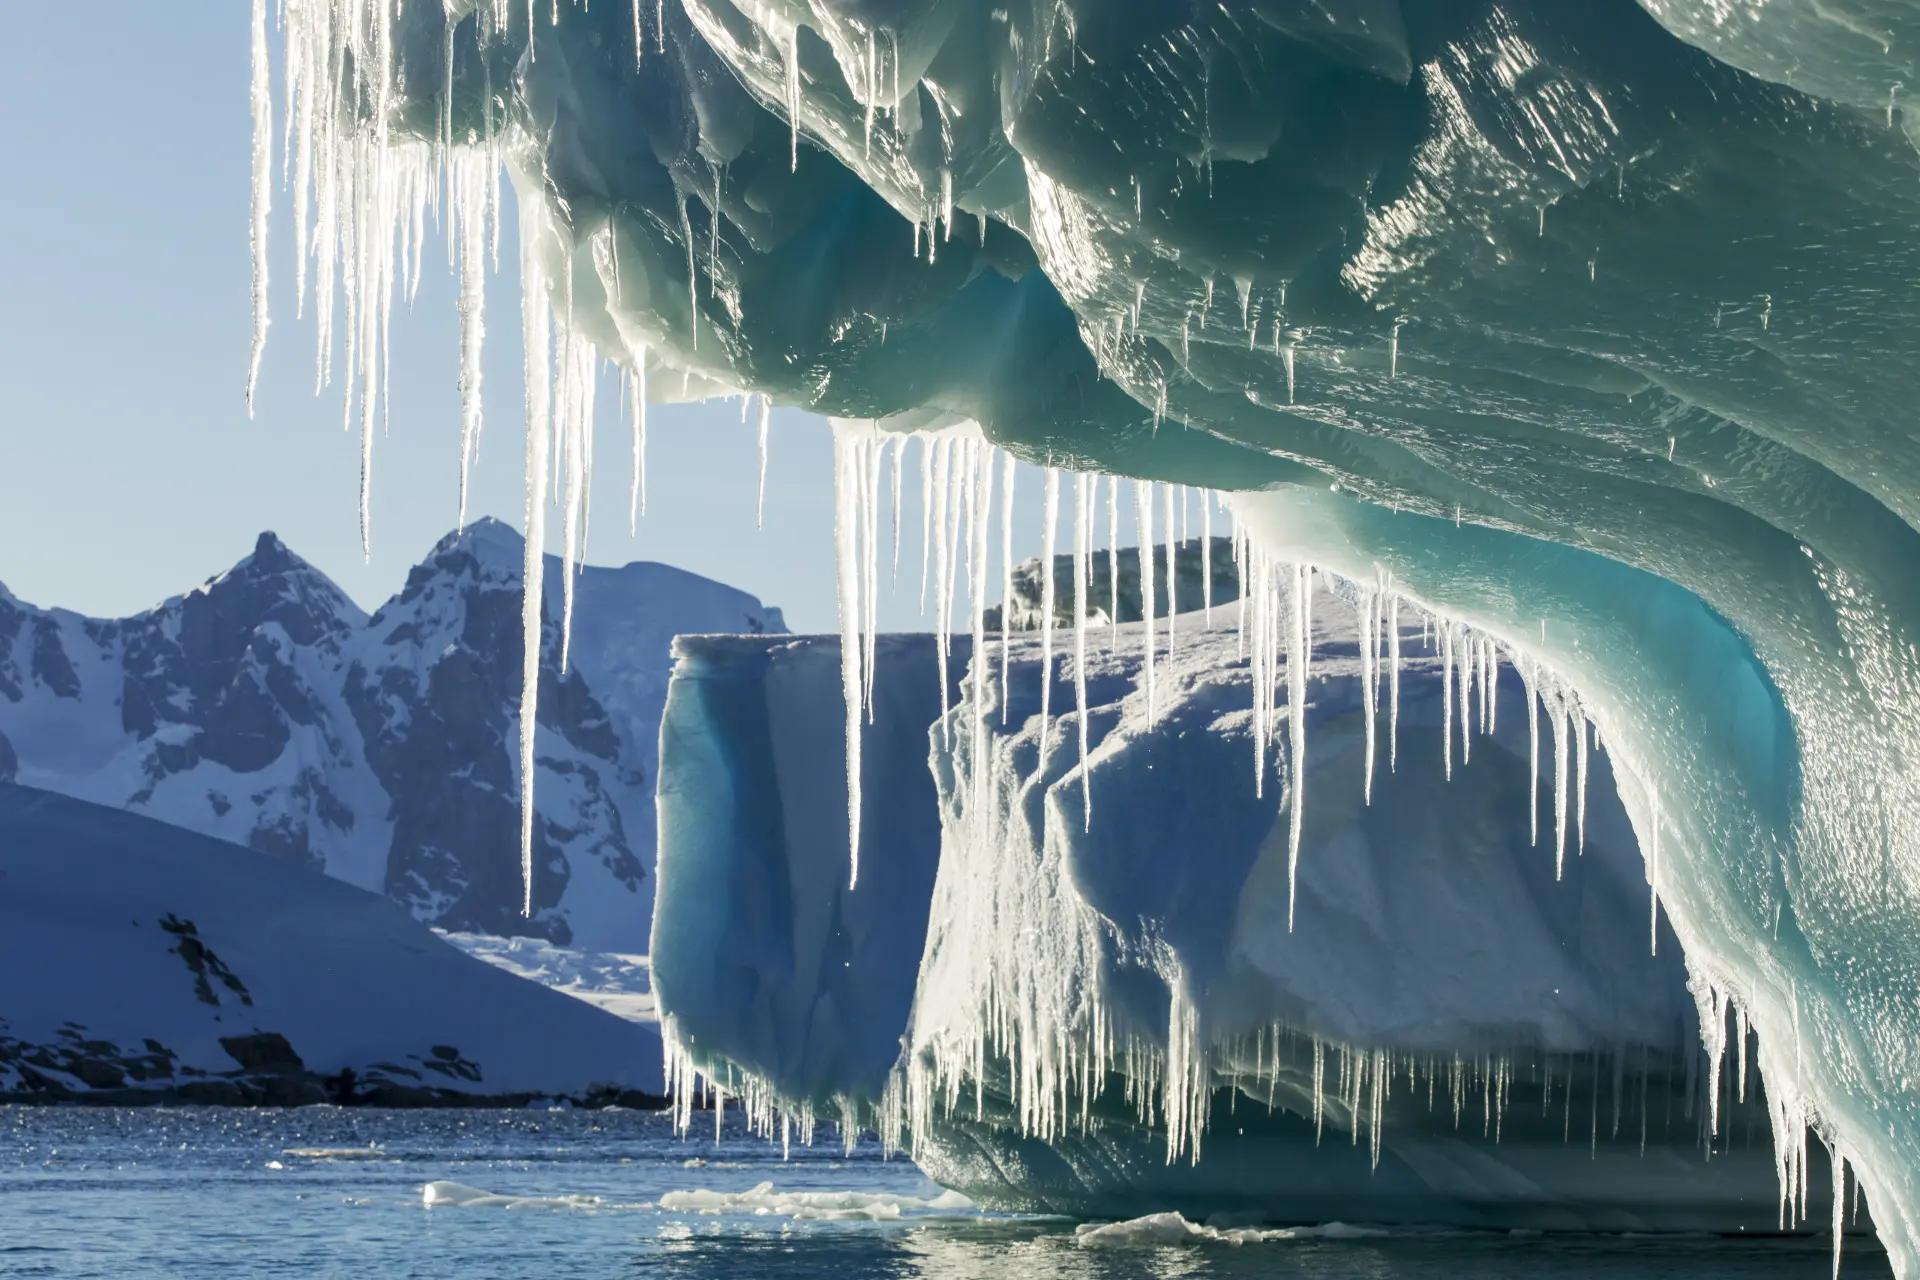 “Hair-raising” study finds glaciers are melting at an accelerating rate